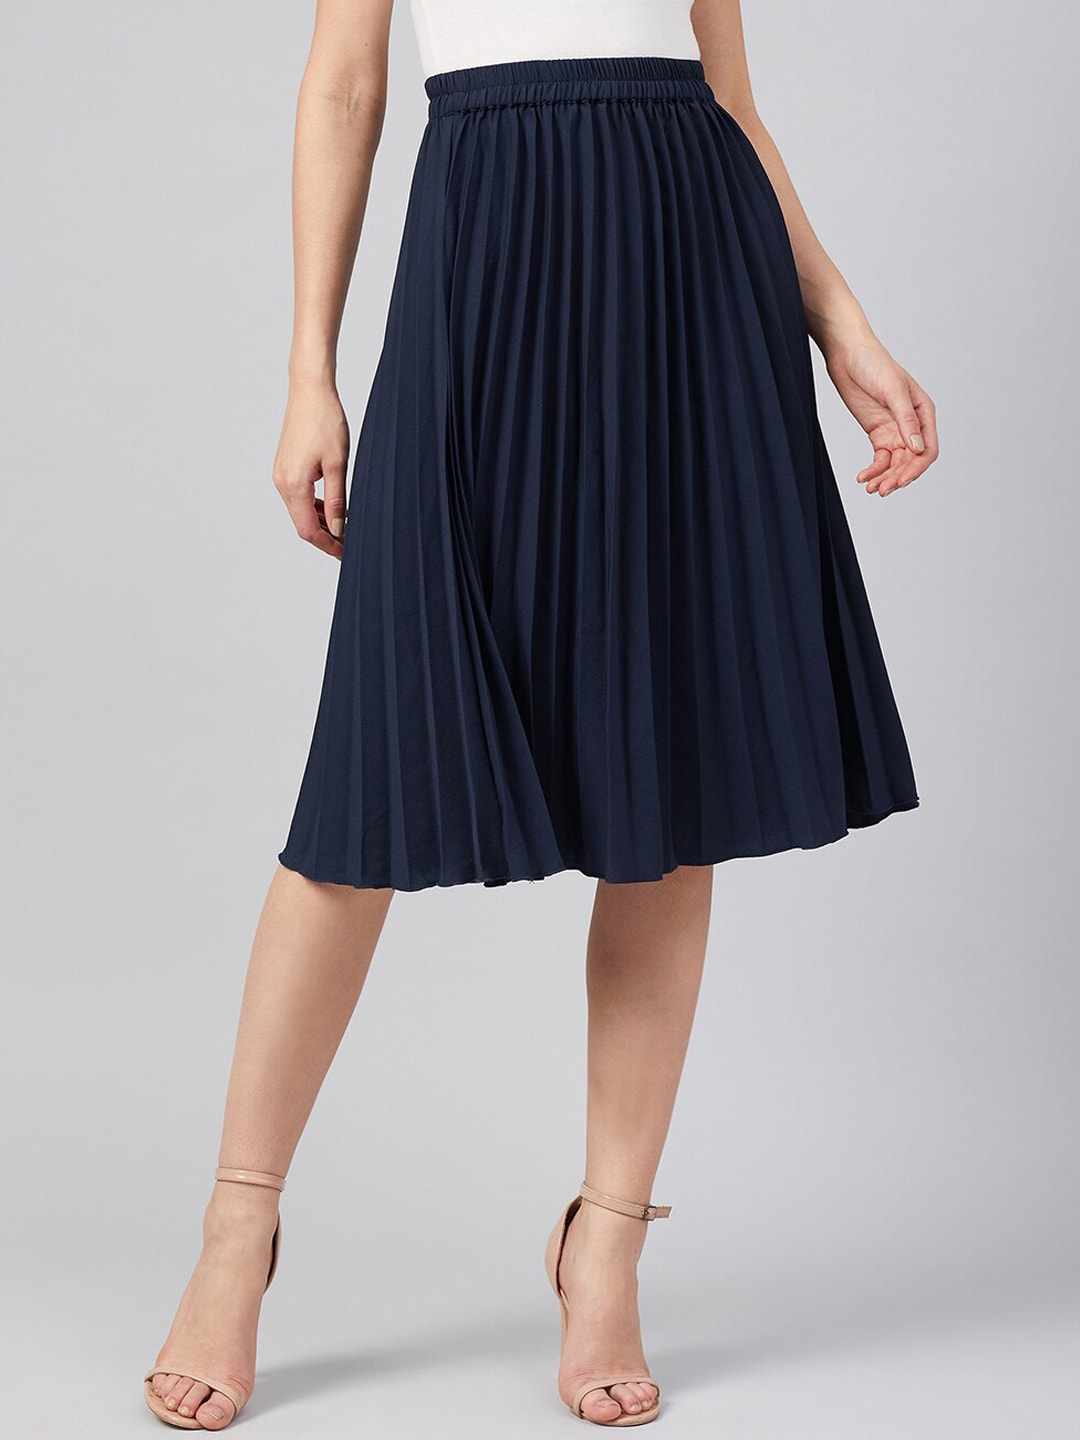 RARE Navy Blue A-Line Midi Skirt Price in India